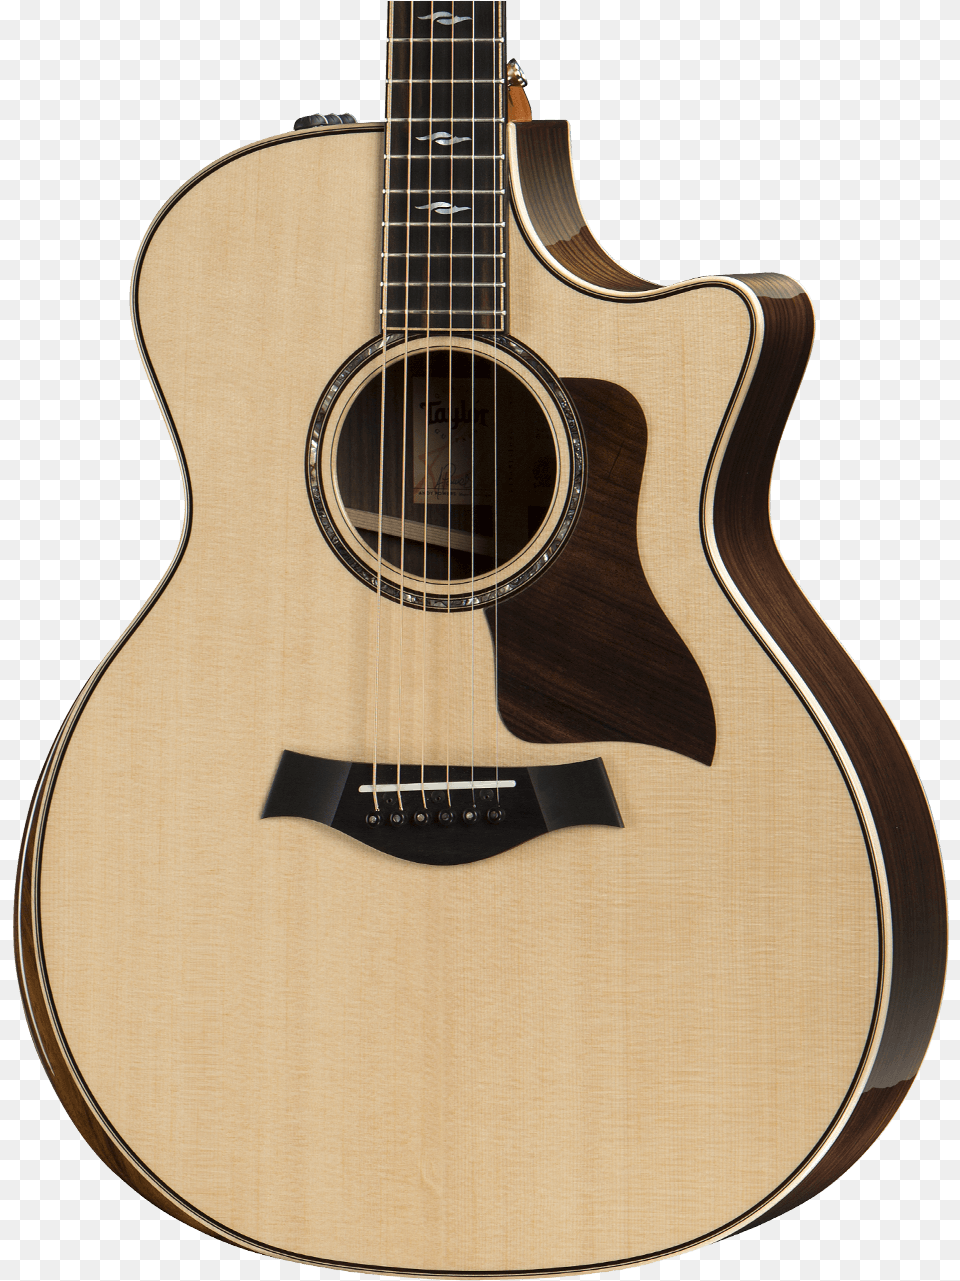 Taylor 814ce Deluxe, Guitar, Musical Instrument Free Transparent Png